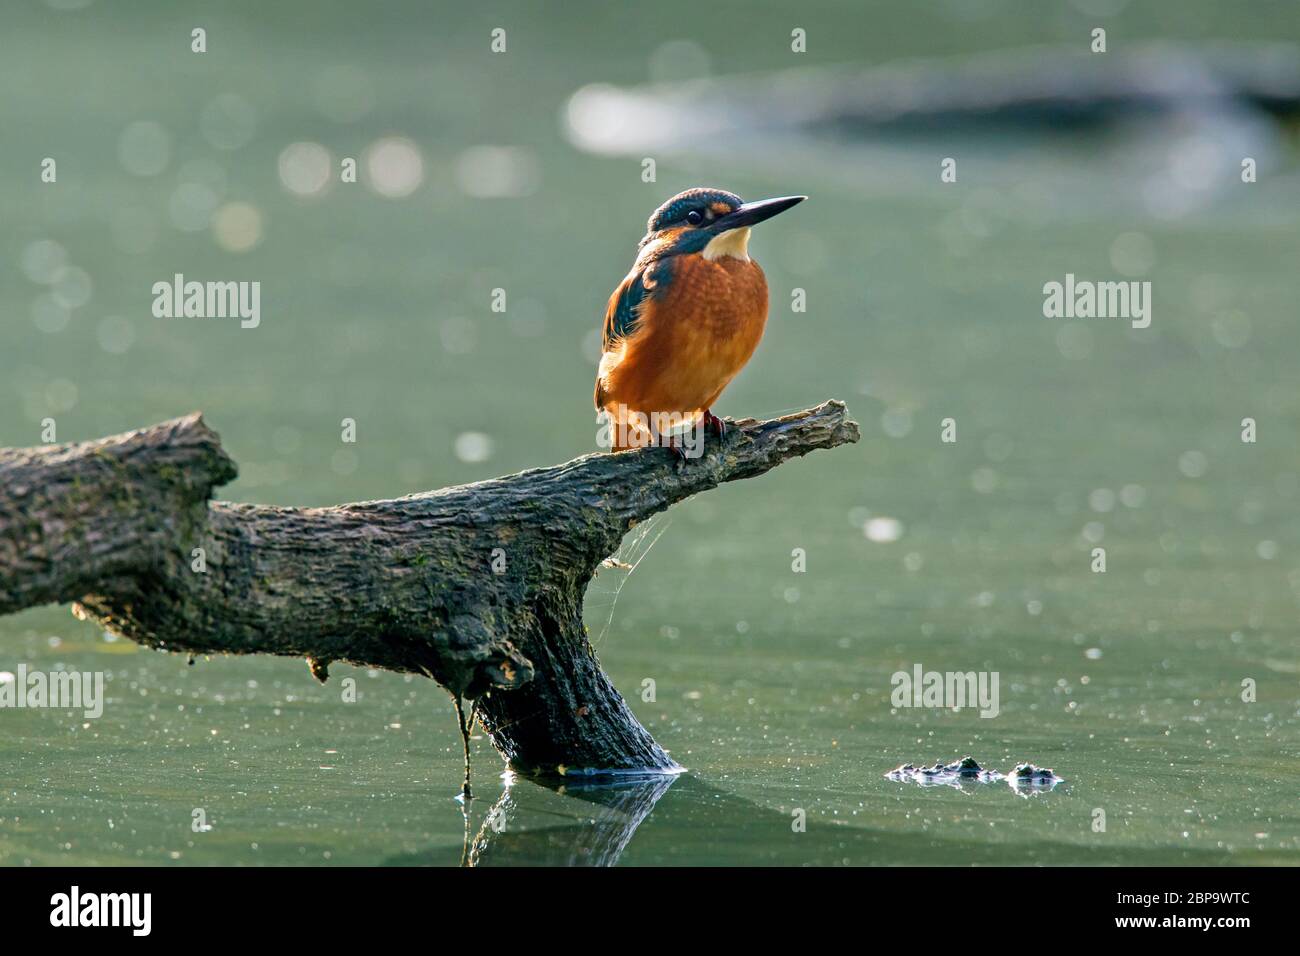 Common kingfisher / Eurasian kingfisher (Alcedo atthis) male perched on branch over water of pond Stock Photo